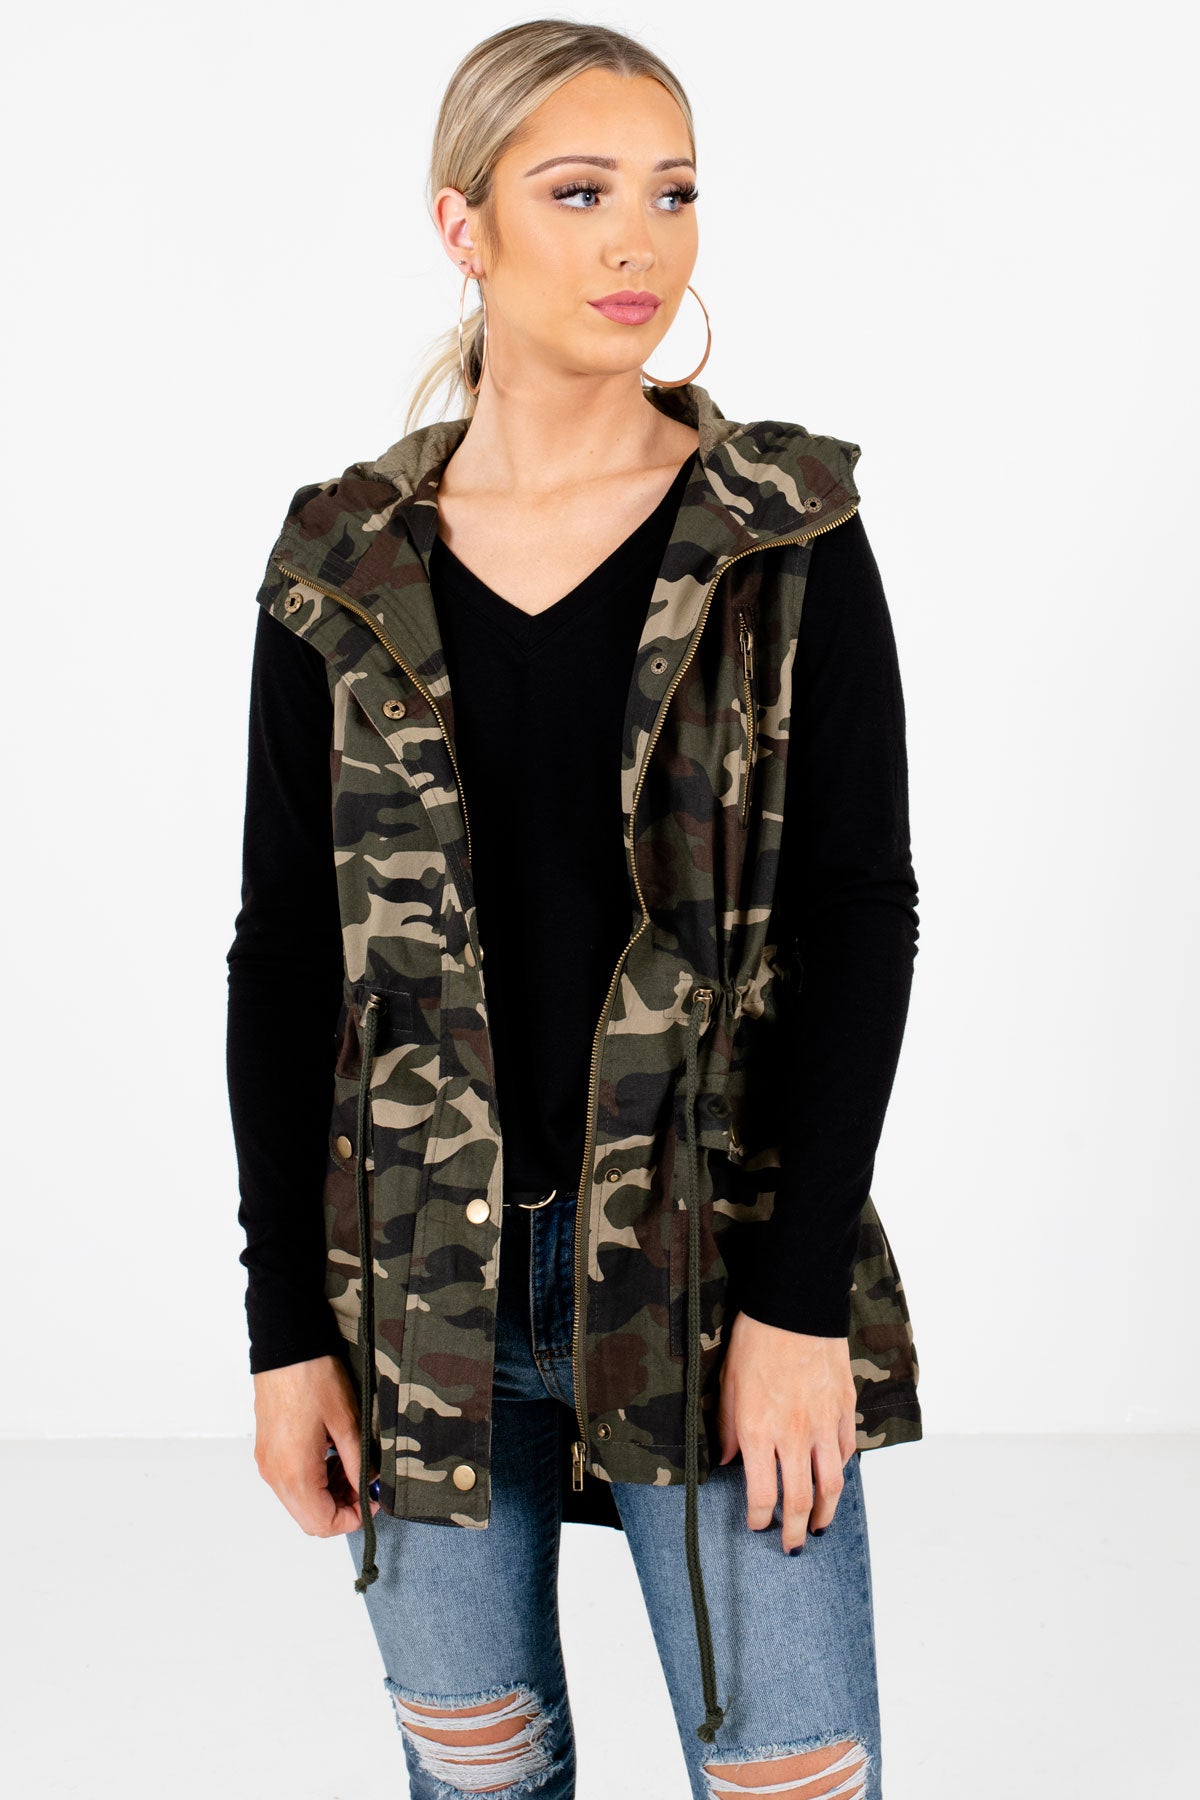 Green and Brown Camouflage Print Boutique Vests for Women